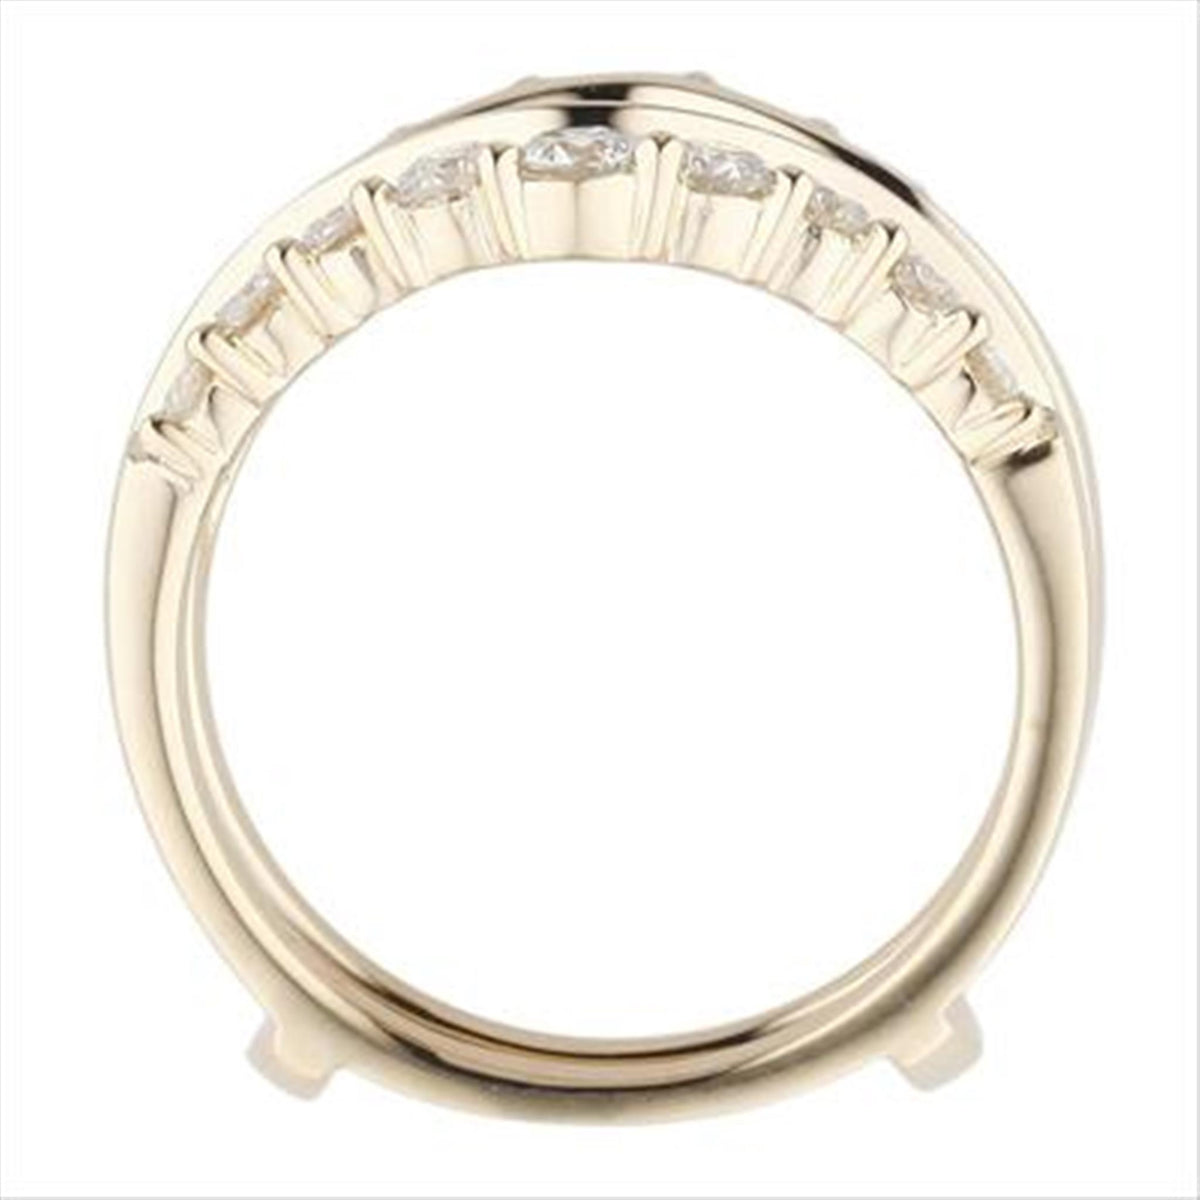 18Kt Yellow Gold Insert Guard / Wrap Insert Guard Ring With 1.06cttw Natural Diamonds